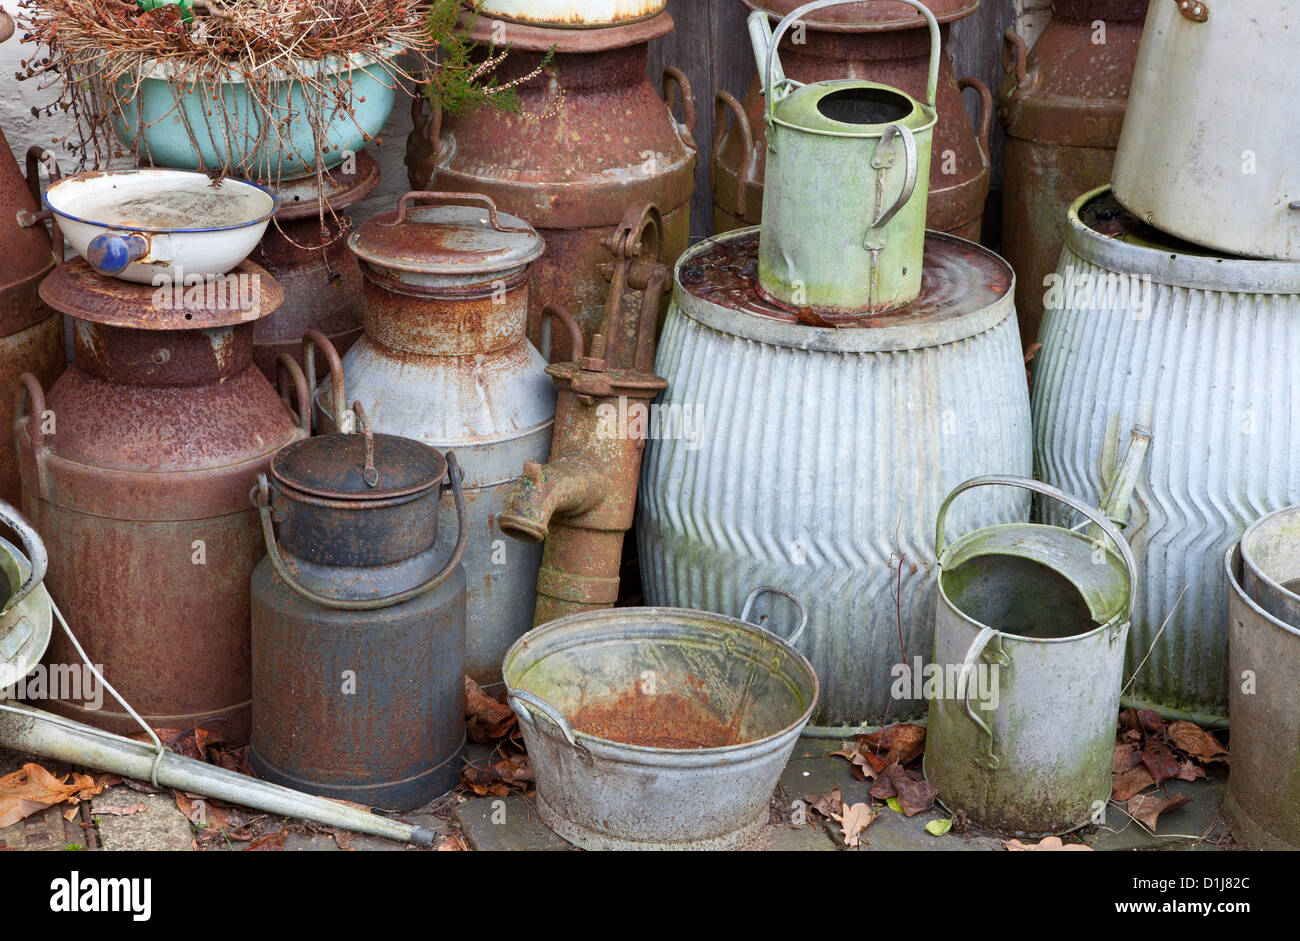 Old metal milk churns, watering cans, buckets etc Stock Photo